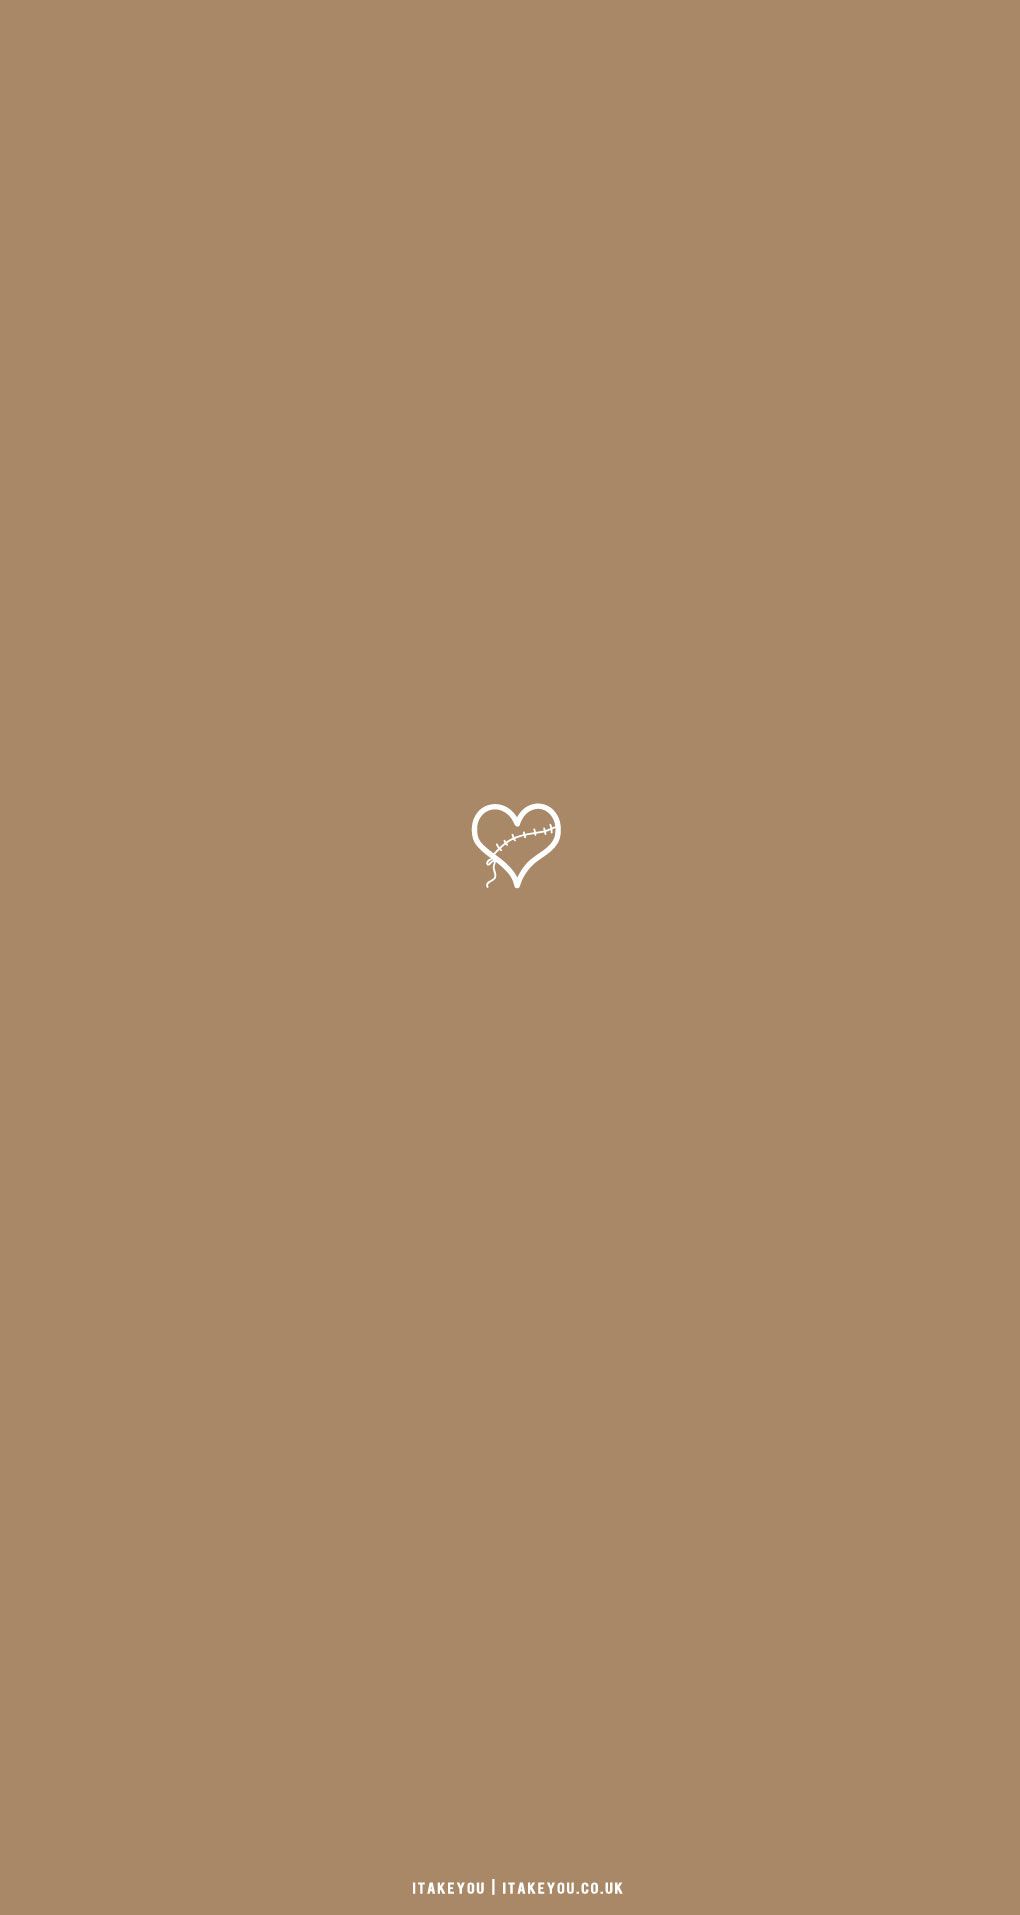 A heart shaped logo on brown background - Heart, pretty, wedding, cute, couple, phone, brown, minimalist, cool, light brown, Vogue